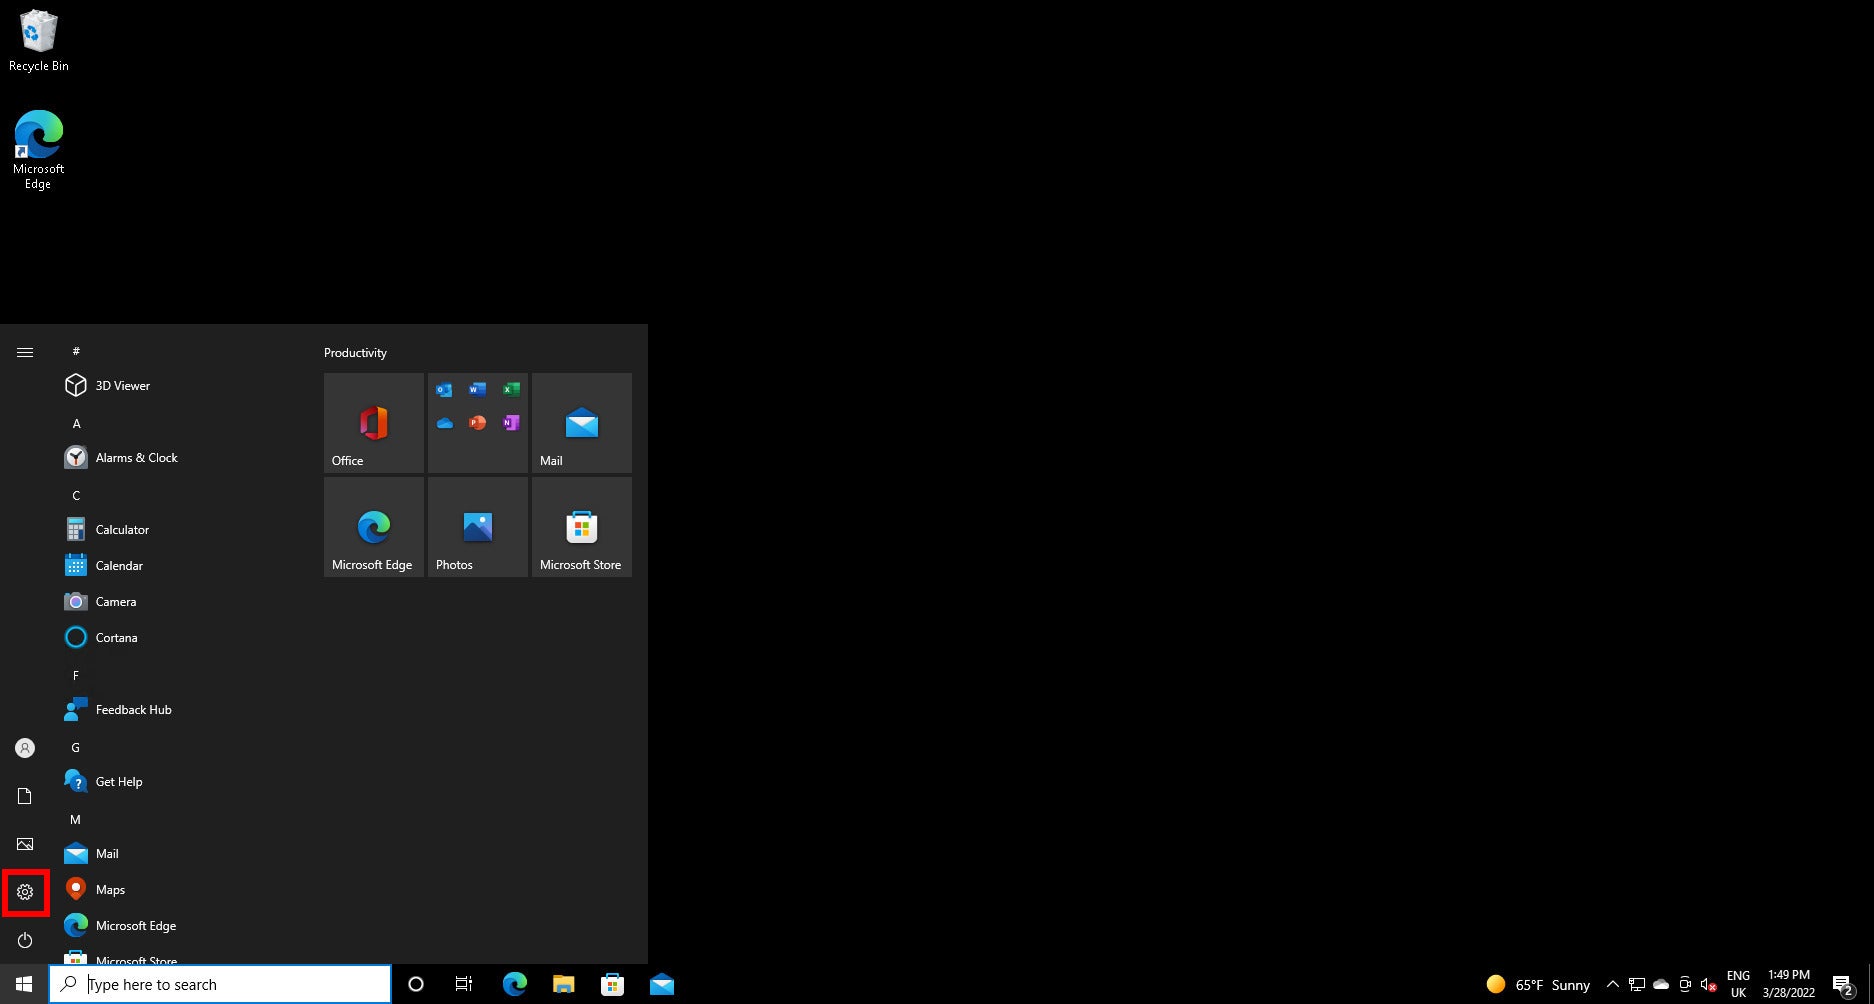 The gear icon in the Start menu is hightlighted